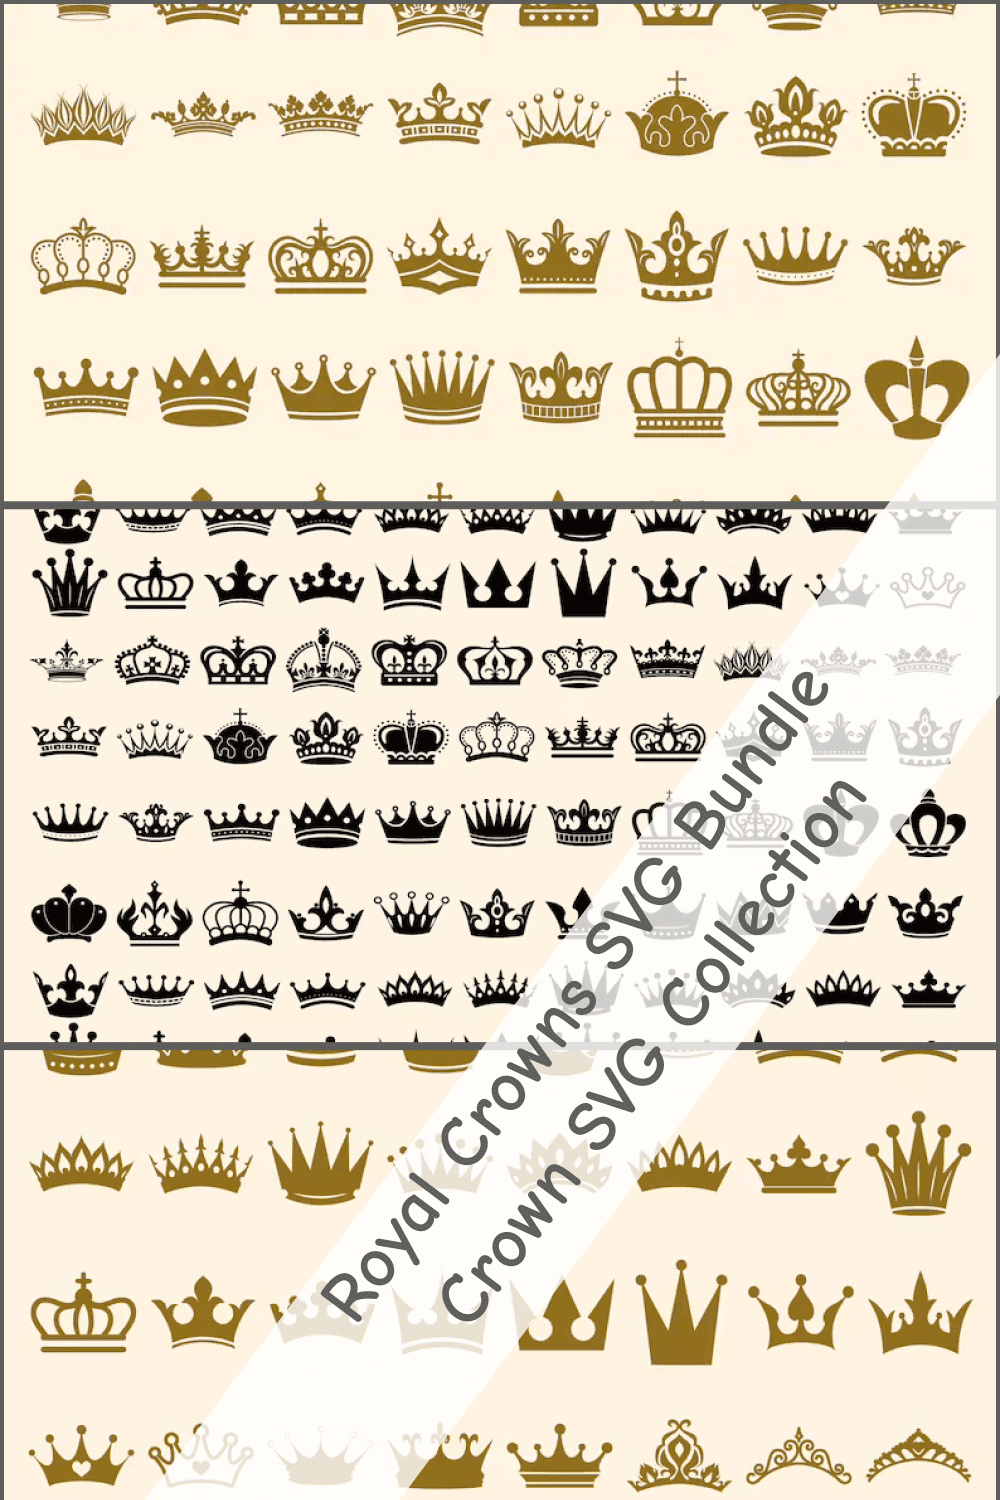 Beautiful and cute crown collection.